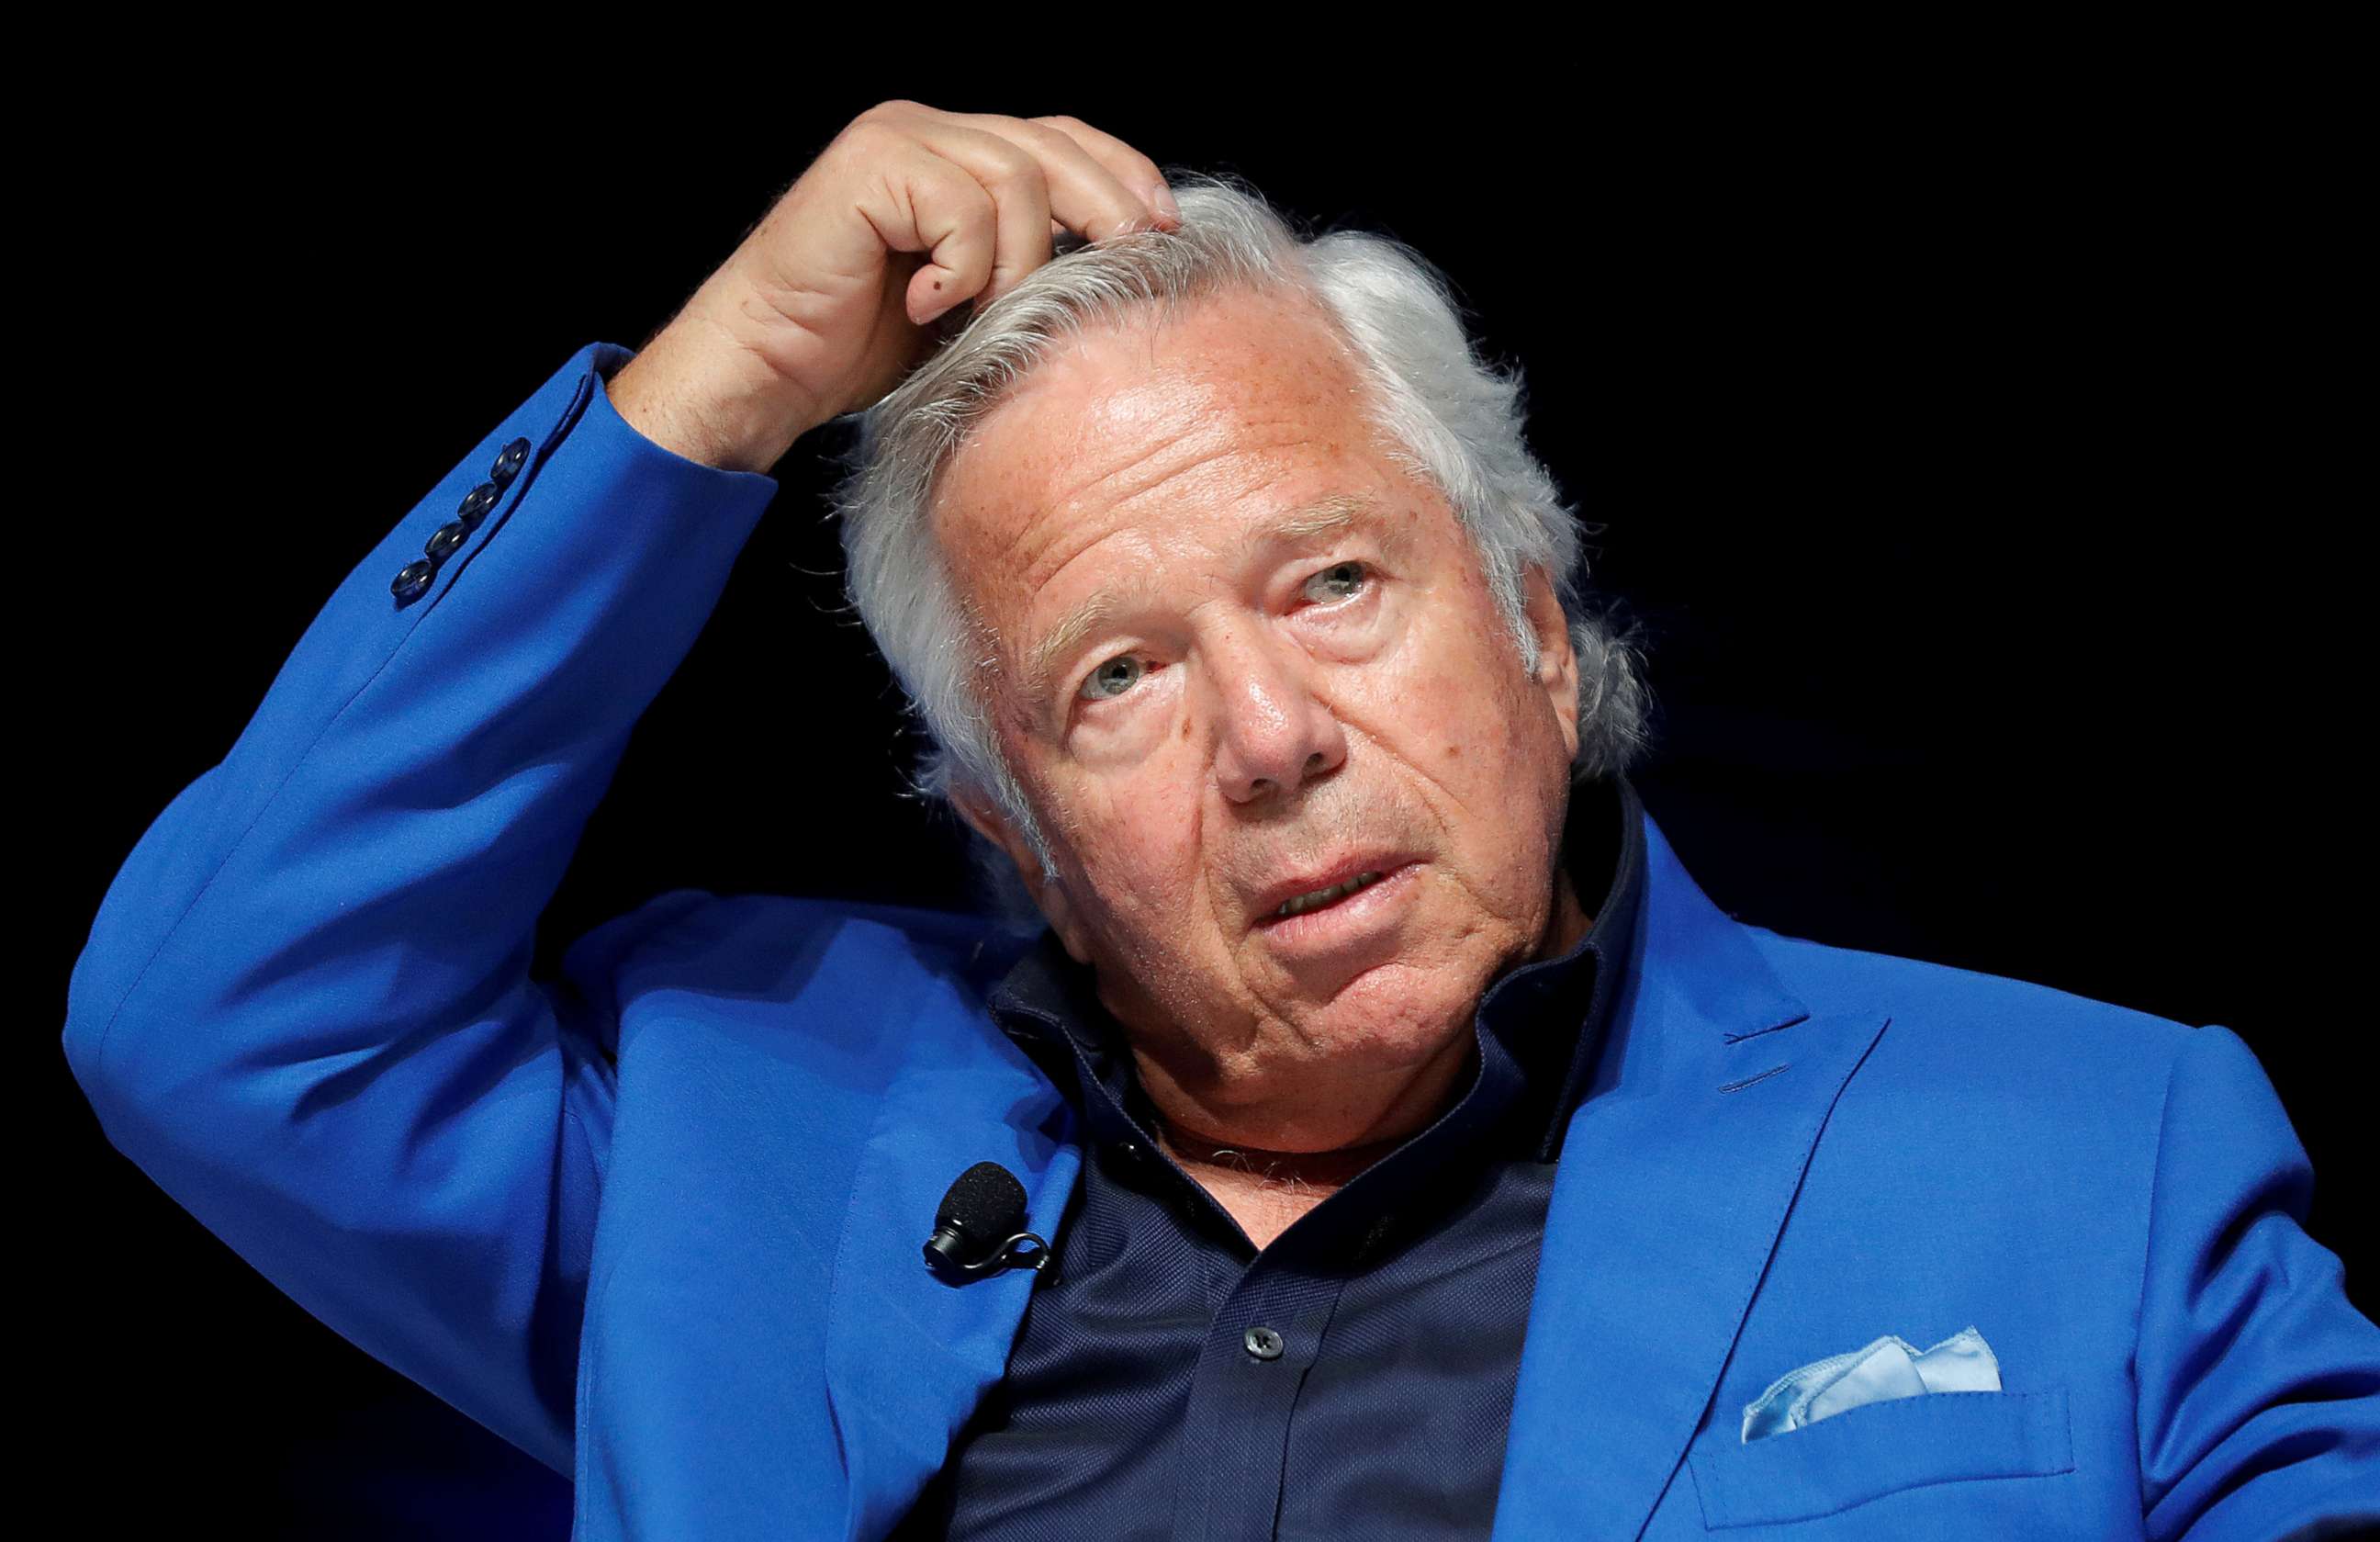 PHOTO: New England Patriots owner Robert Kraft attends a conference at the Cannes Lions Festival in Cannes, France, June 23, 2017.